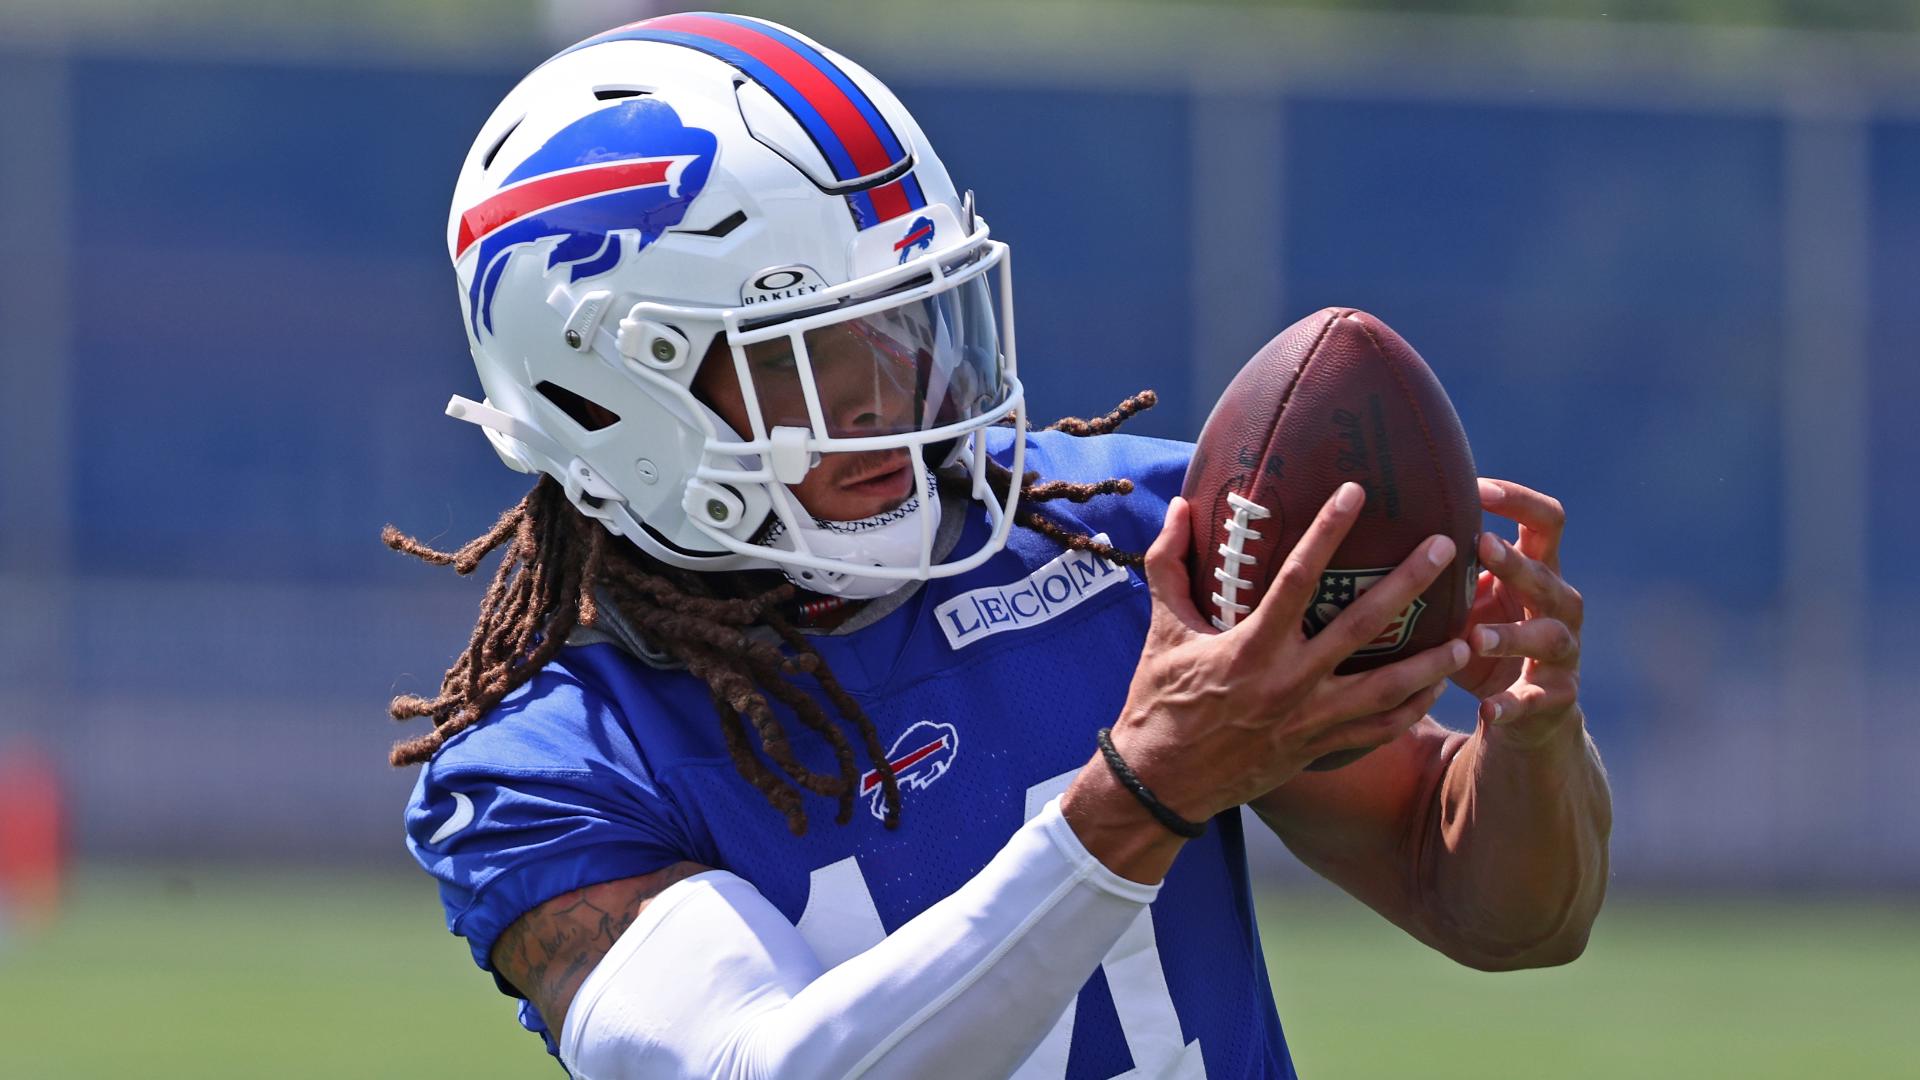 Wide receiver Chase Claypool signed a 1-year deal with the Bills earlier this month and is now hoping to rewrite his NFL story in Buffalo.